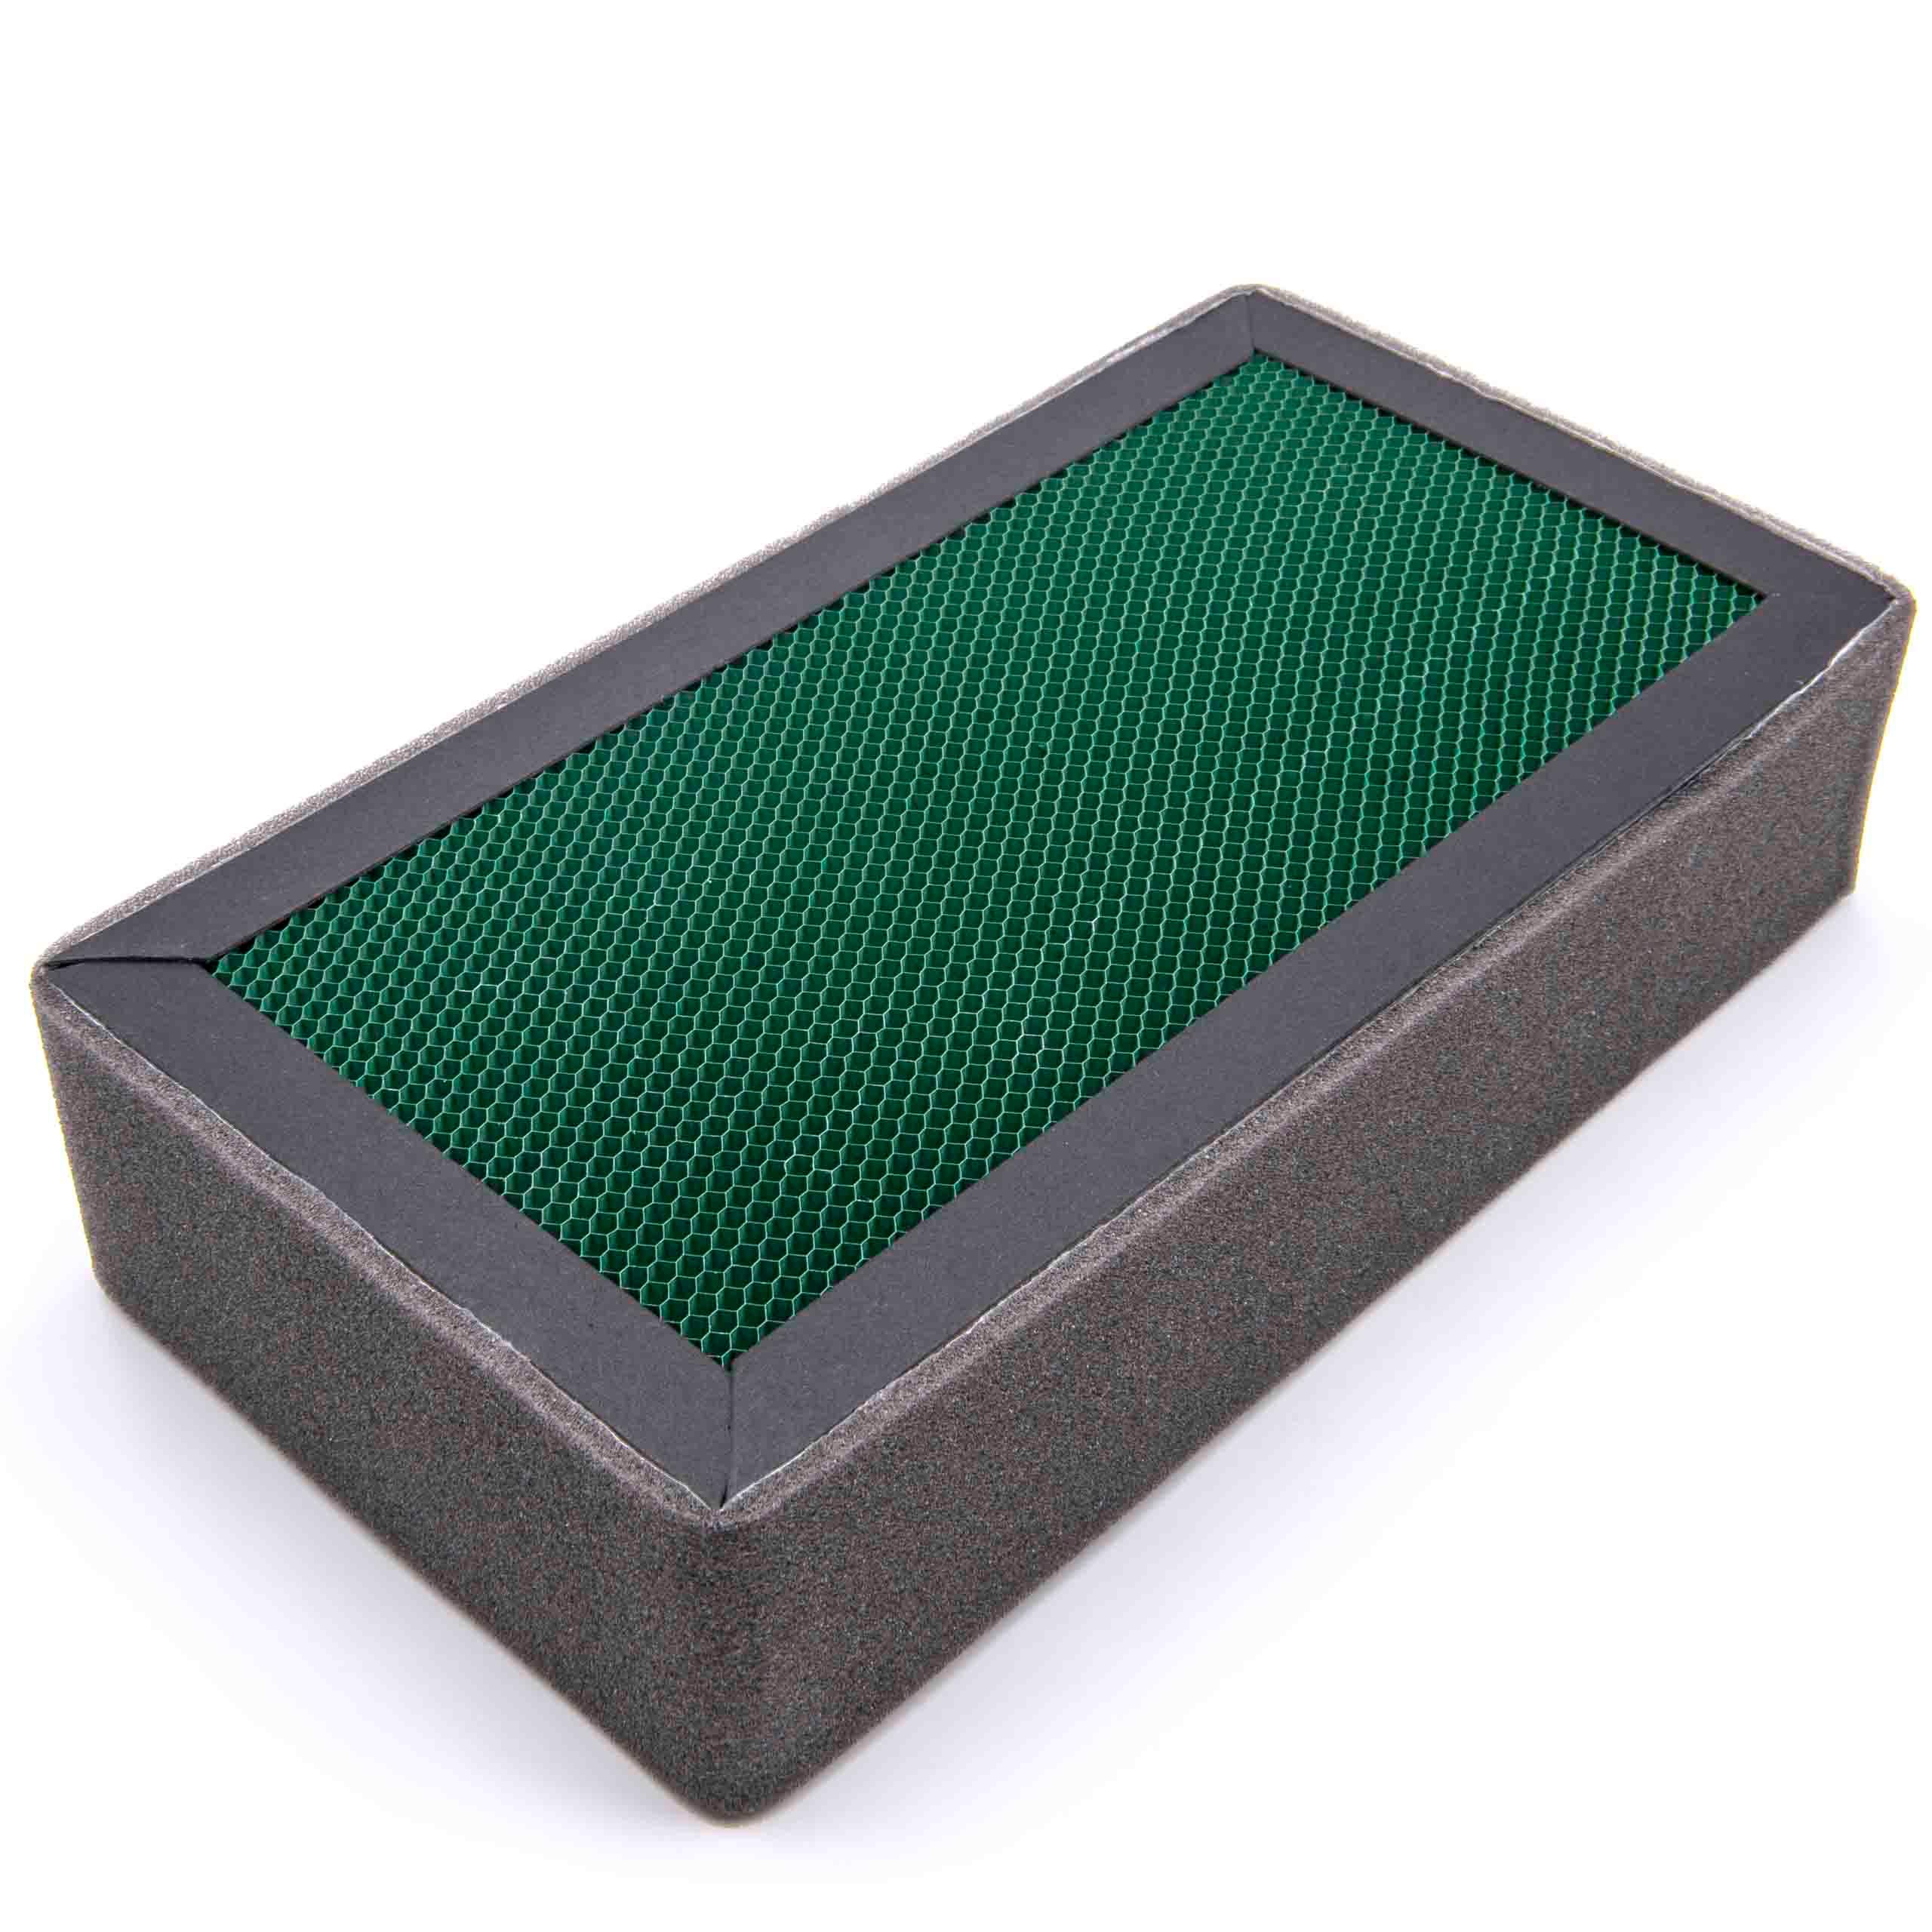 Filter replaces XJ2, PT94049 for Air Purifier etc.